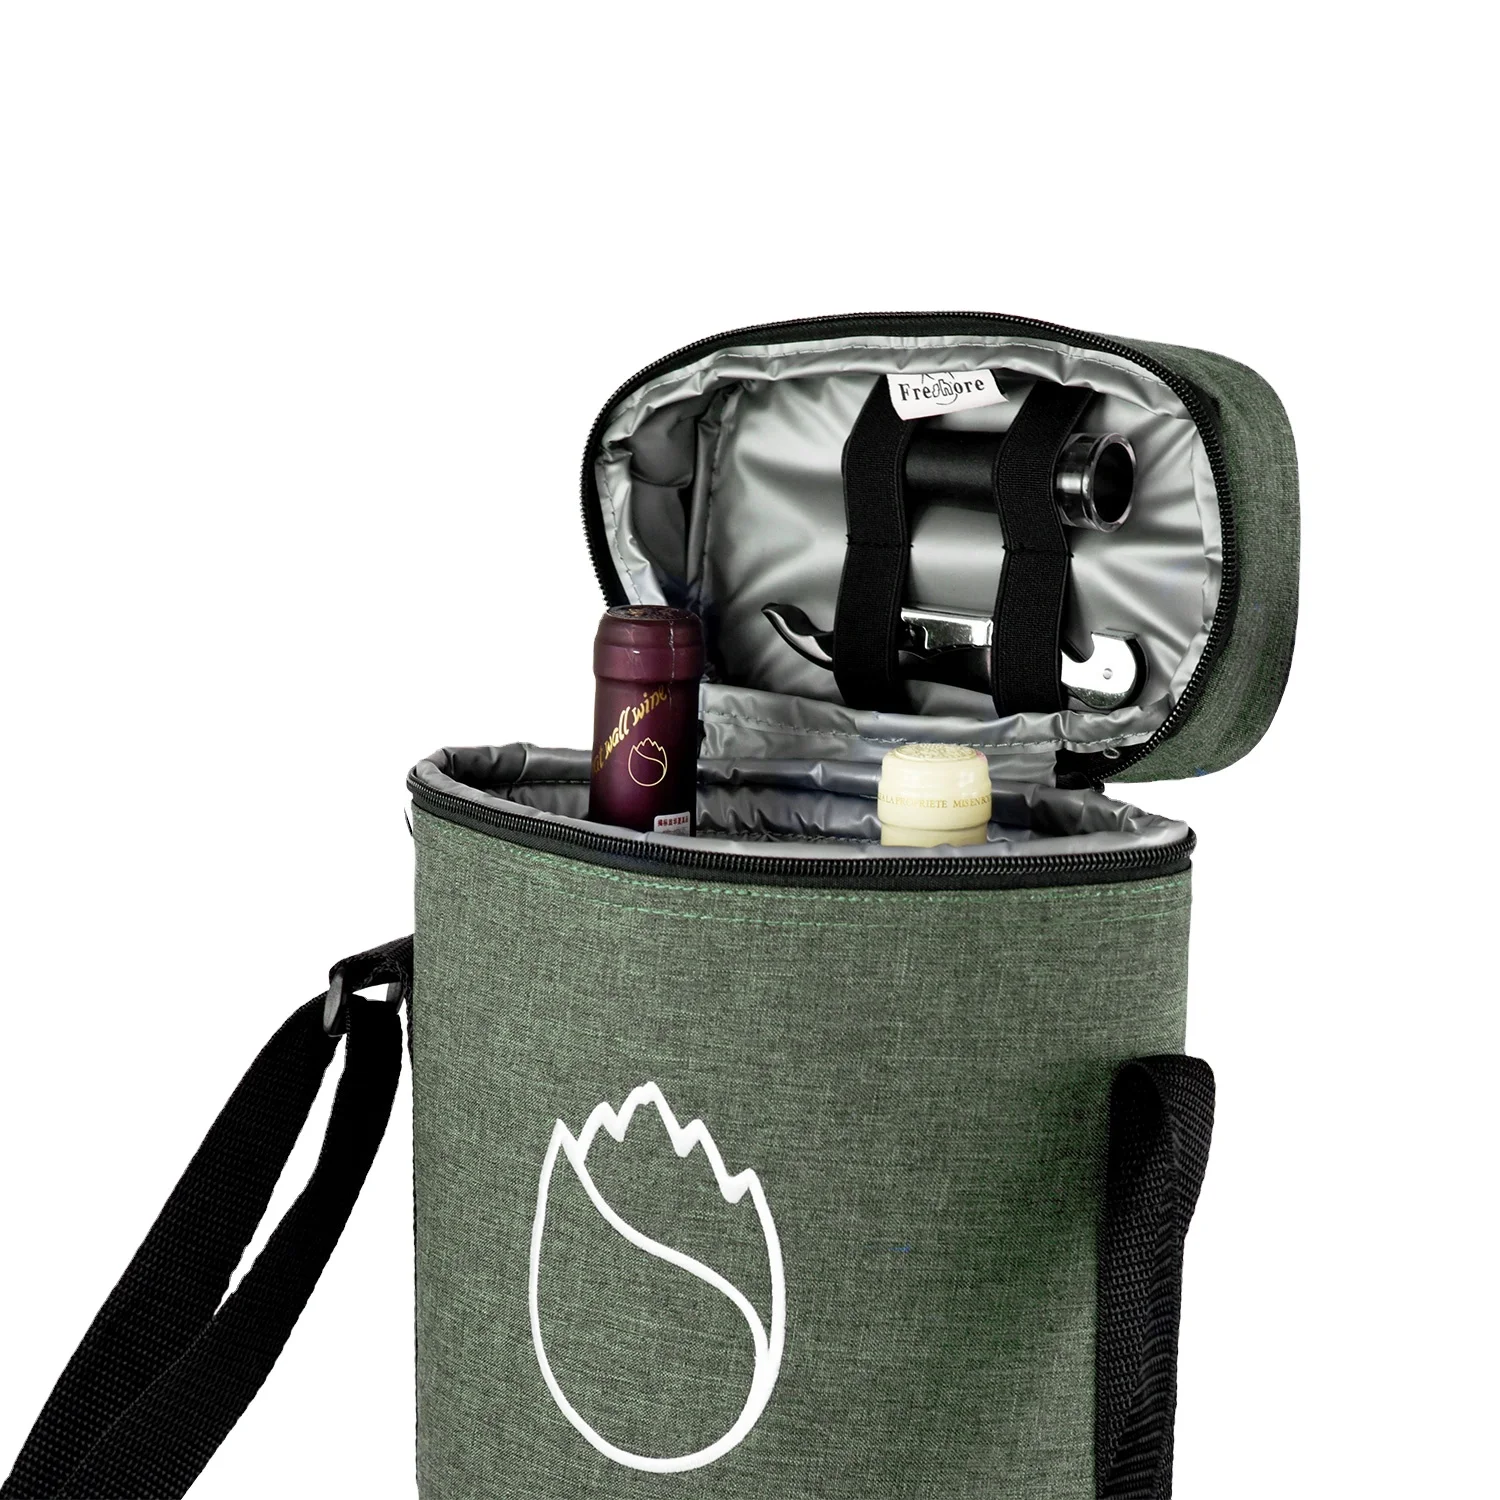 

New Design 2 Bottle Wine Carrier Bag Portable Insulated Wine Tote Bag for Travel, Picnic, Leakproof Wine Cooler Bag, Customized color